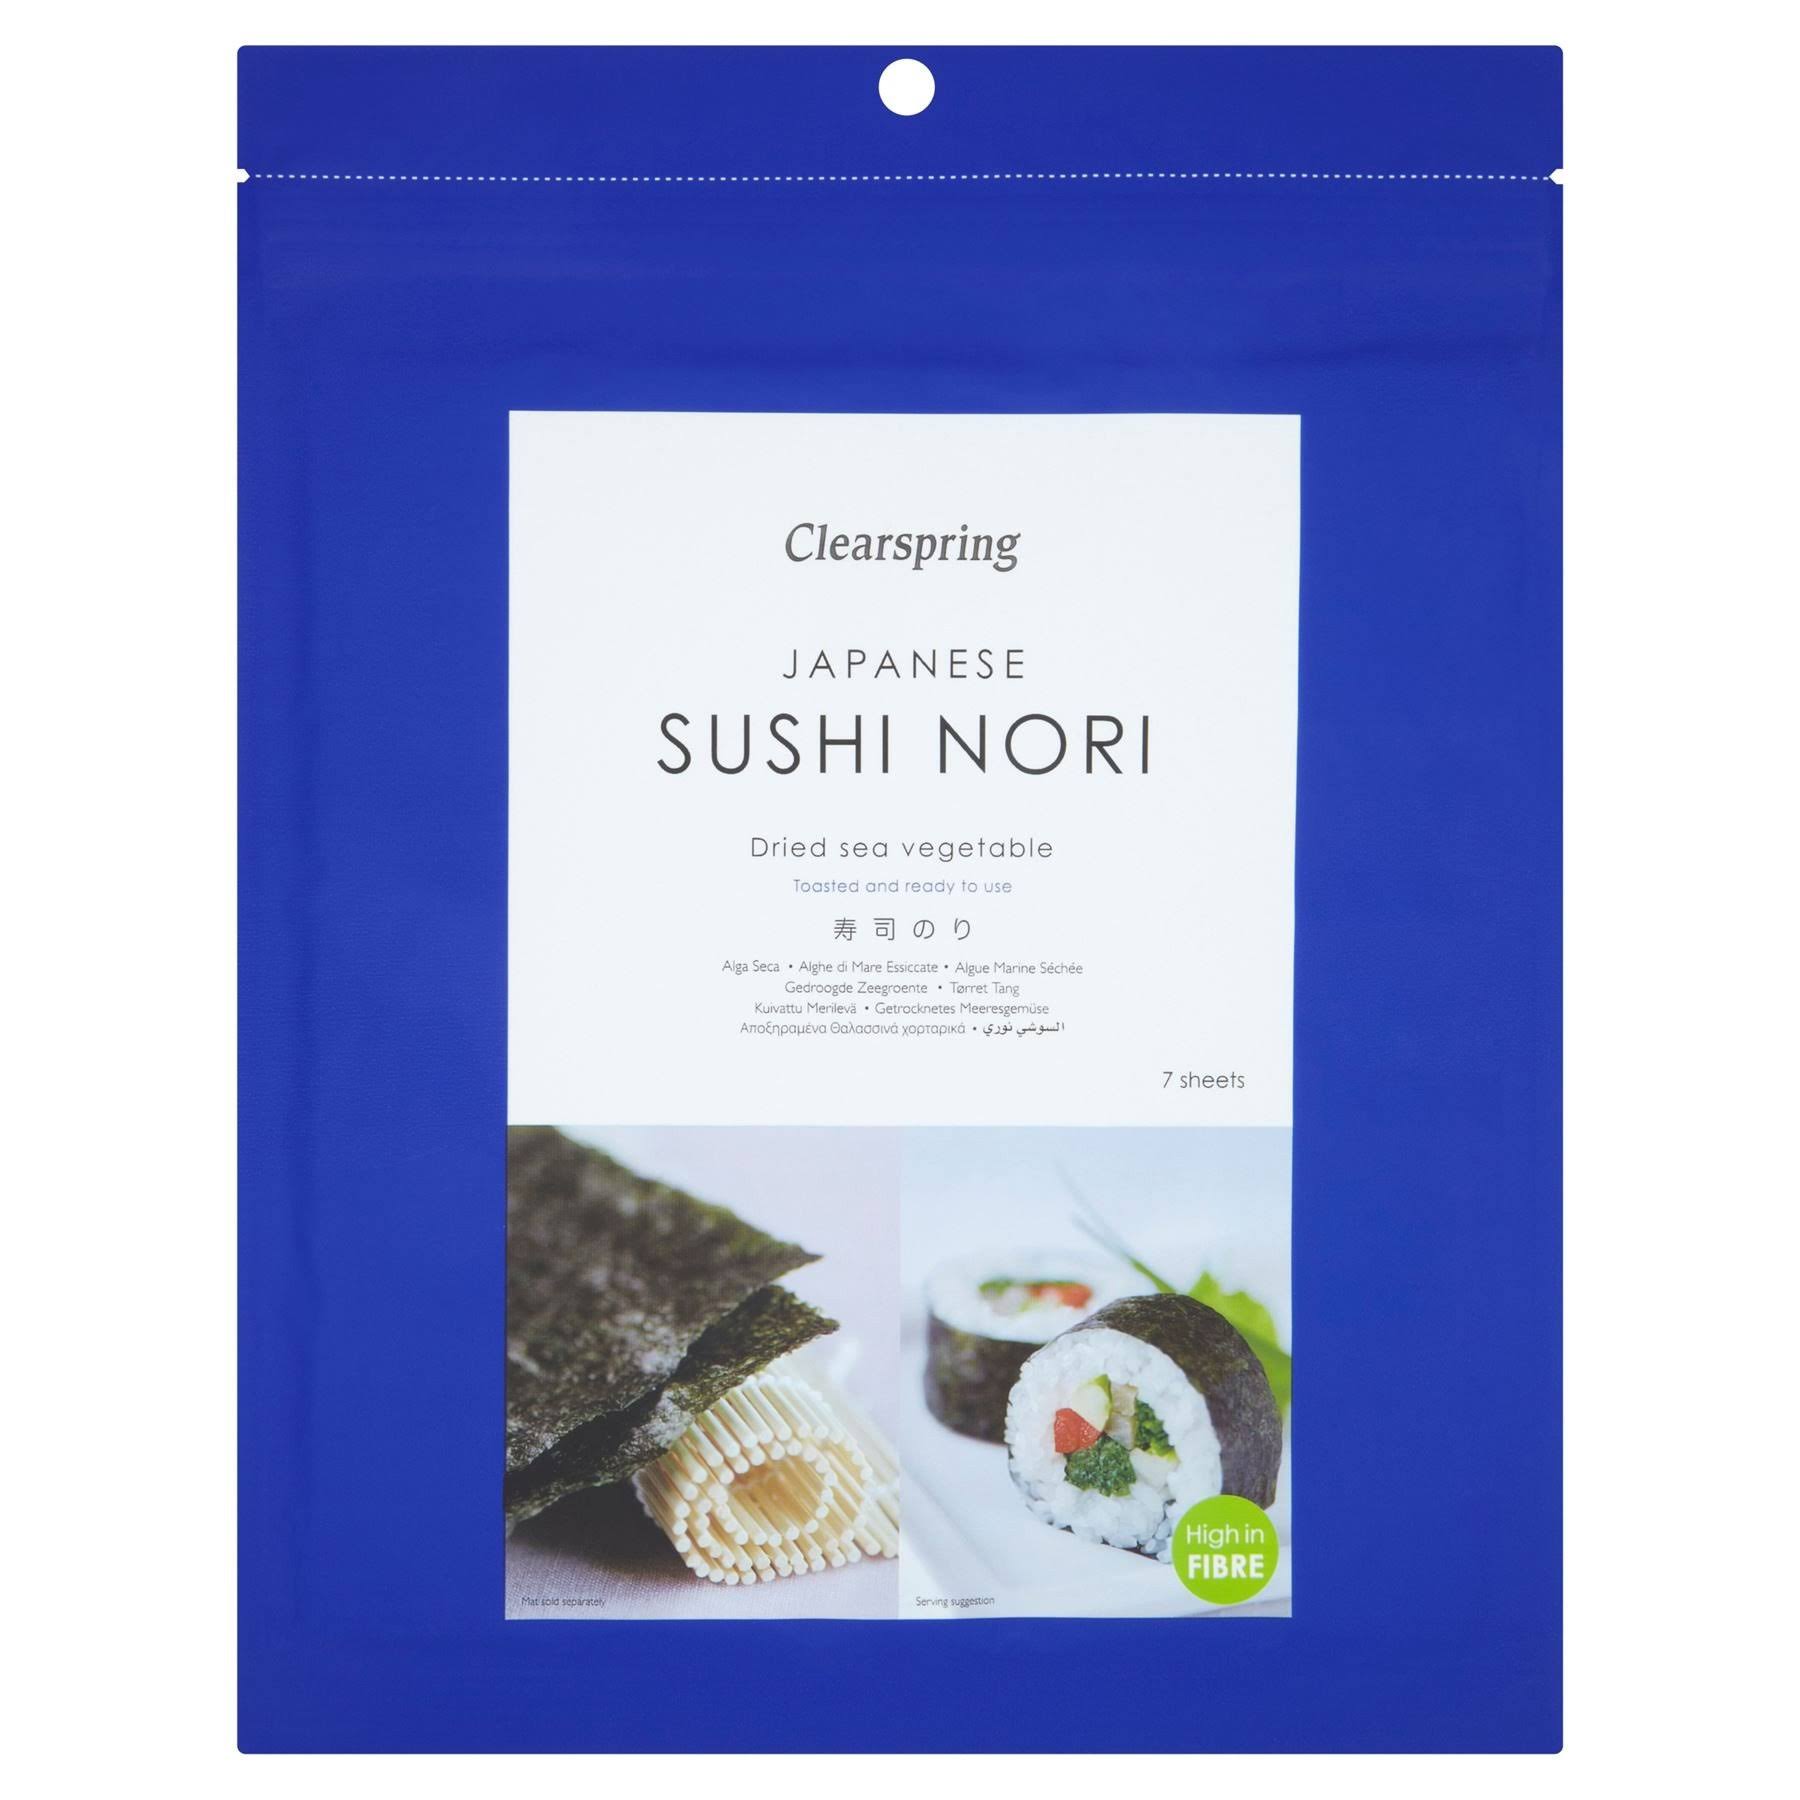 Clearsping Japanese Sushi Nori Sheets - 17g